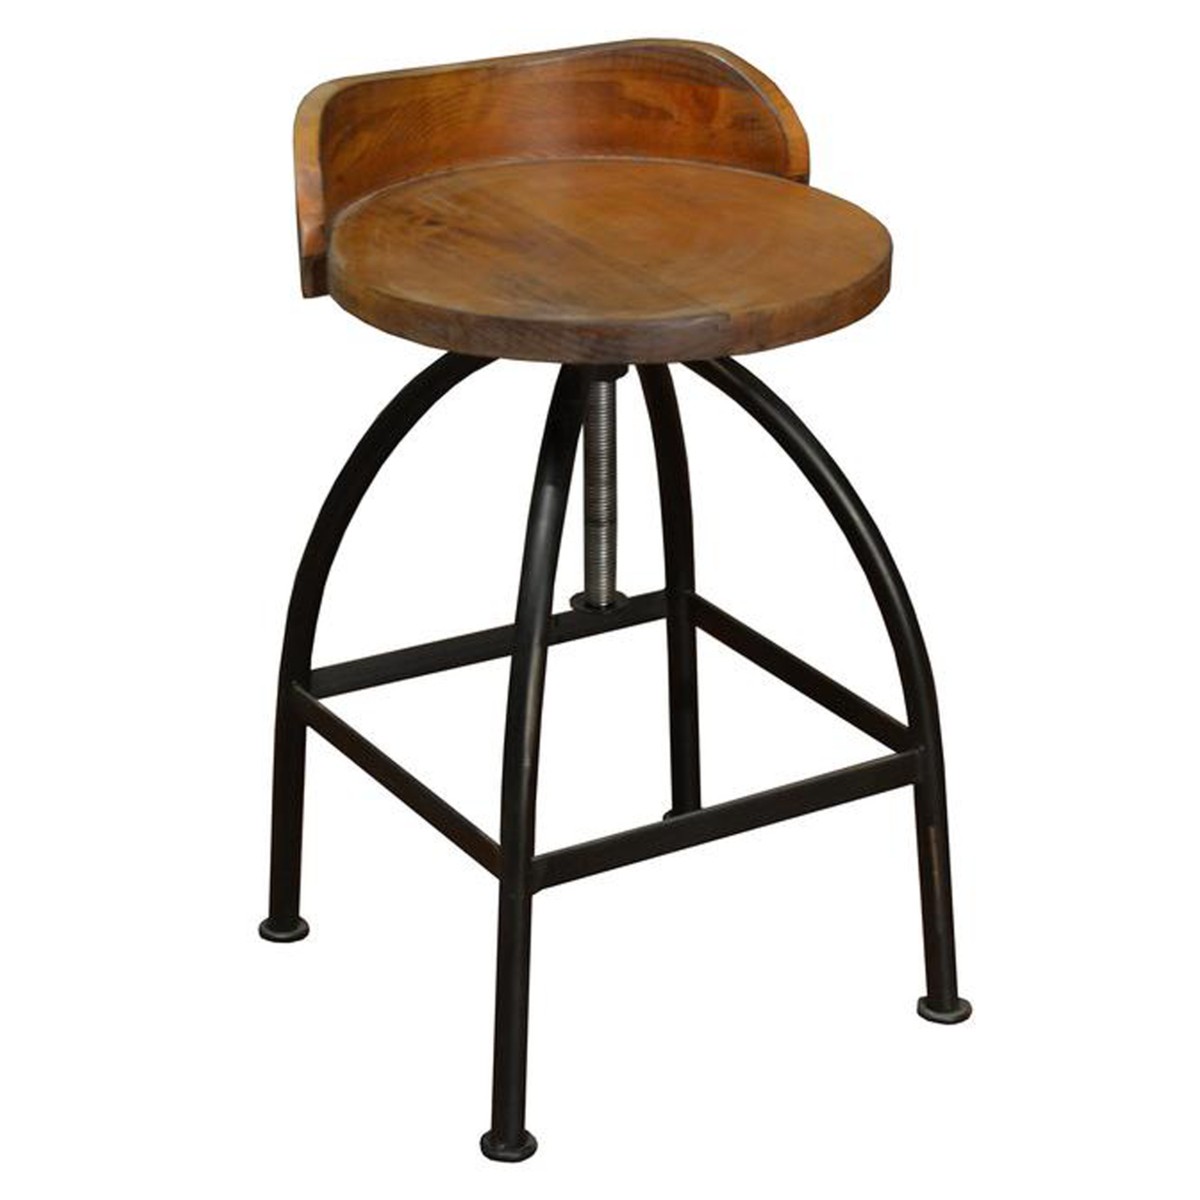 Ashland low back adjustable height bar stool crafters